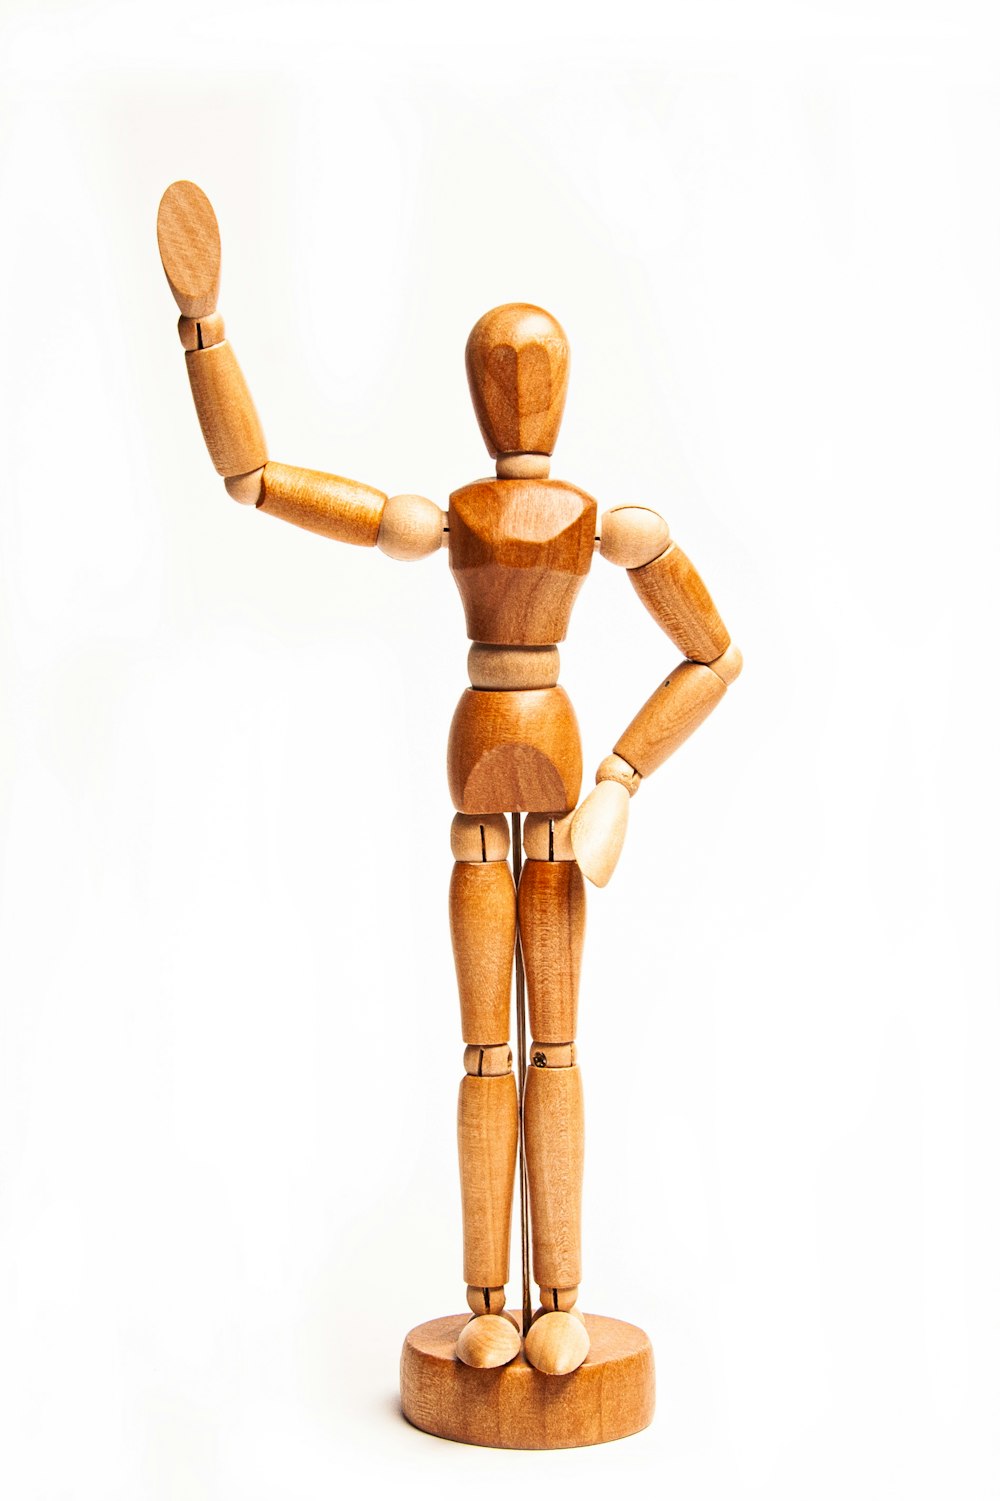 a wooden toy figure holding a piece of wood